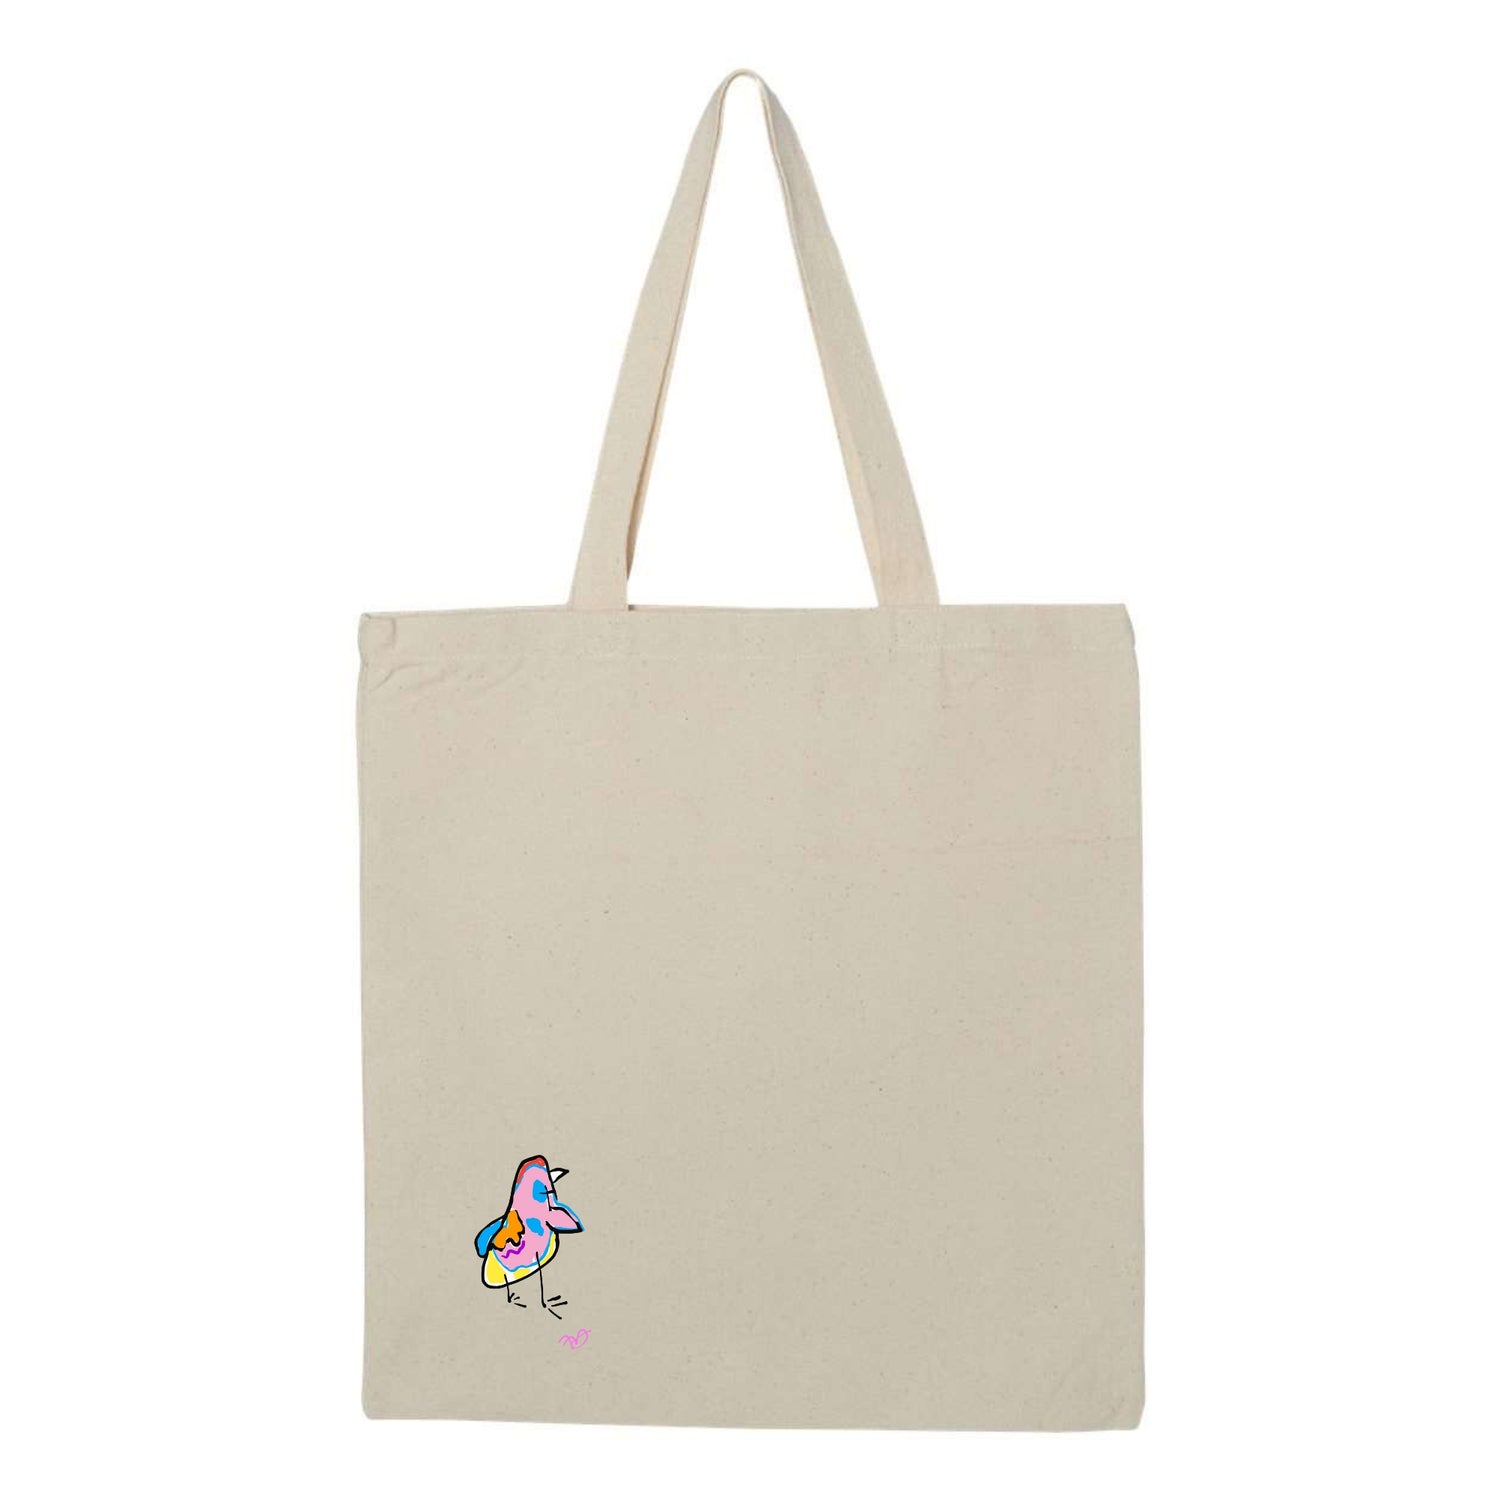 Frank Tote - Small